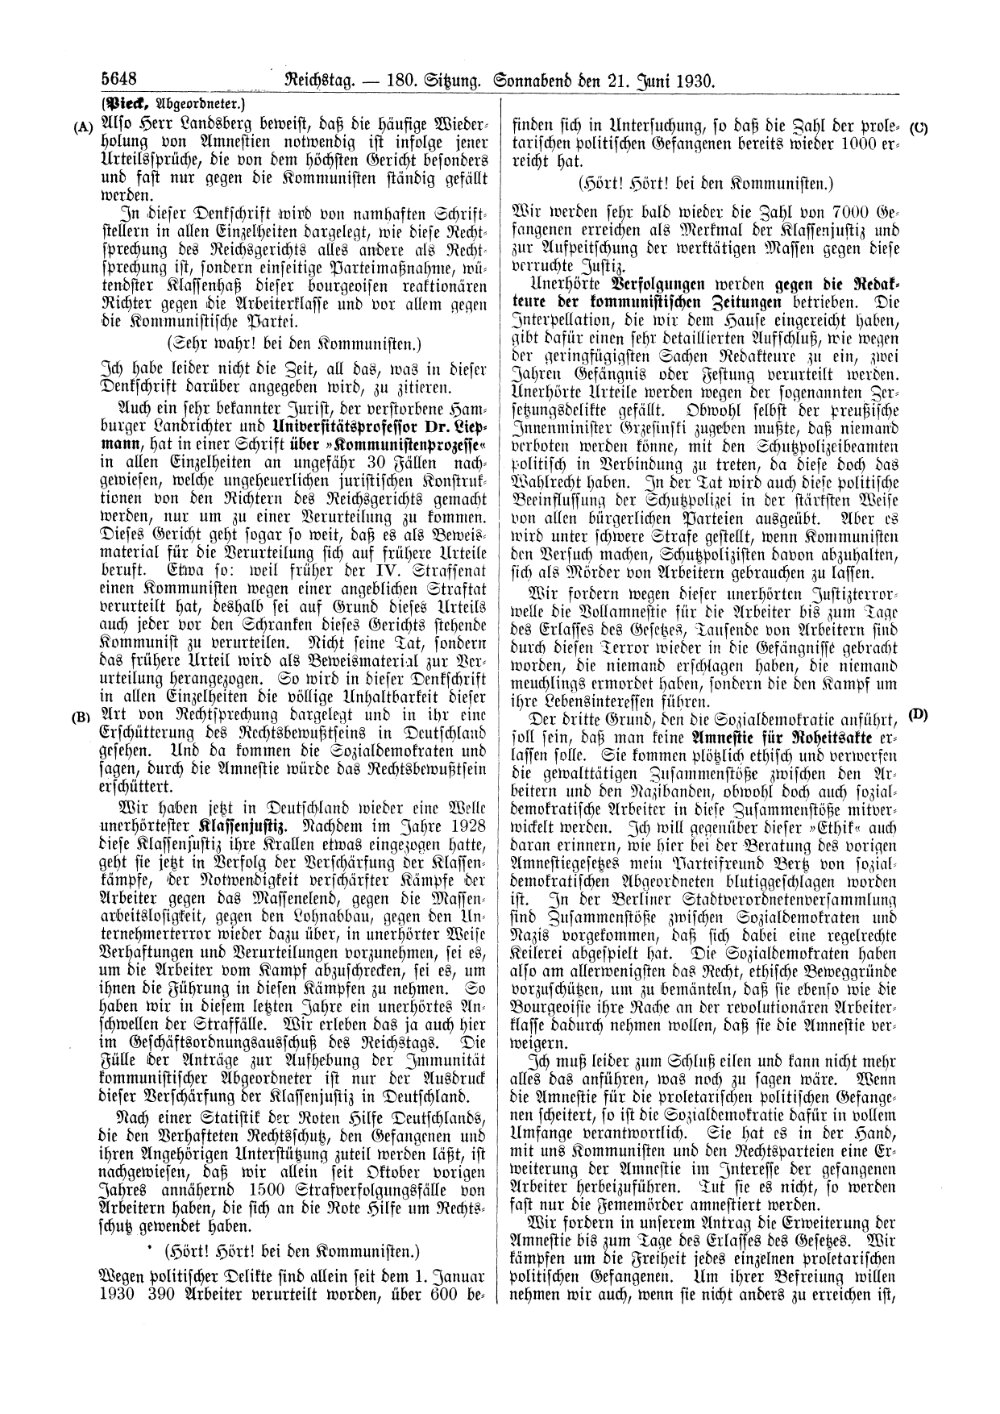 Scan of page 5648